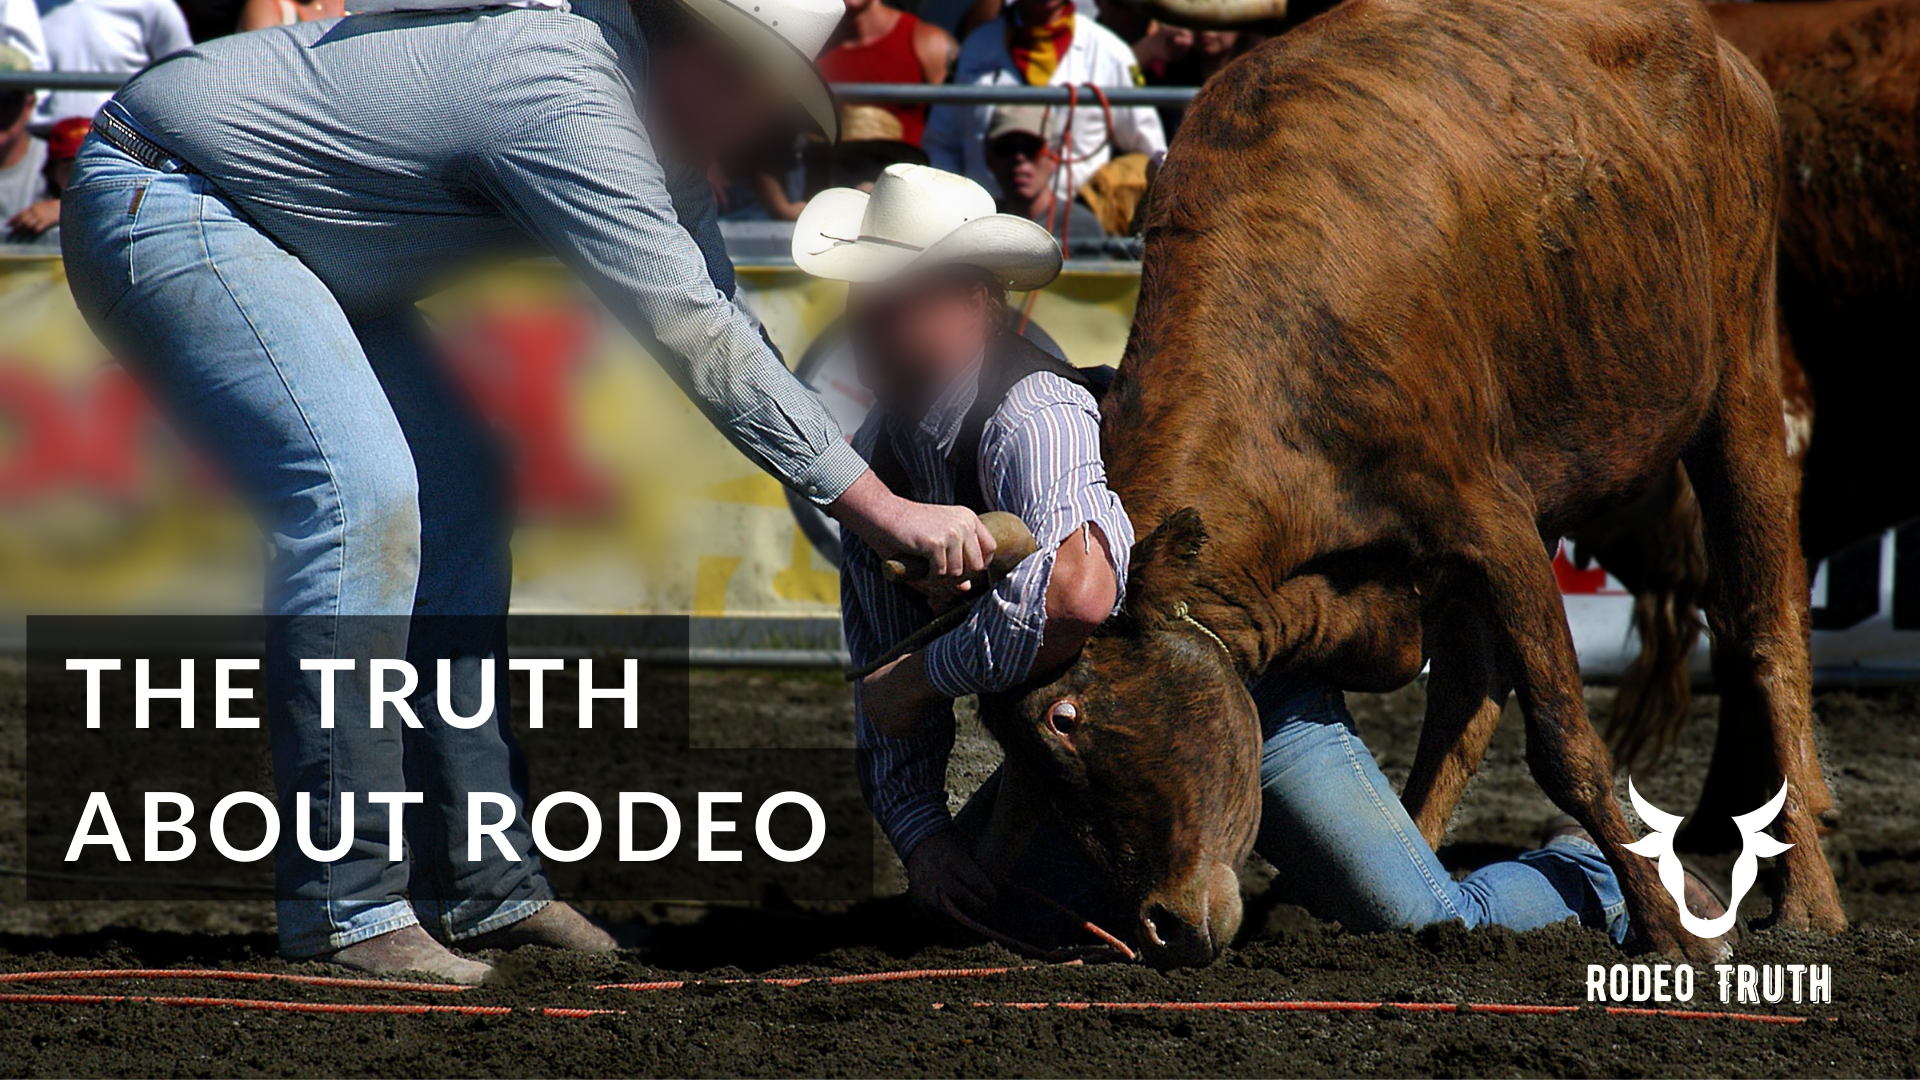 A steer displays eye white during a steer wrestling event; a text overlay reads "The truth about rodeo"